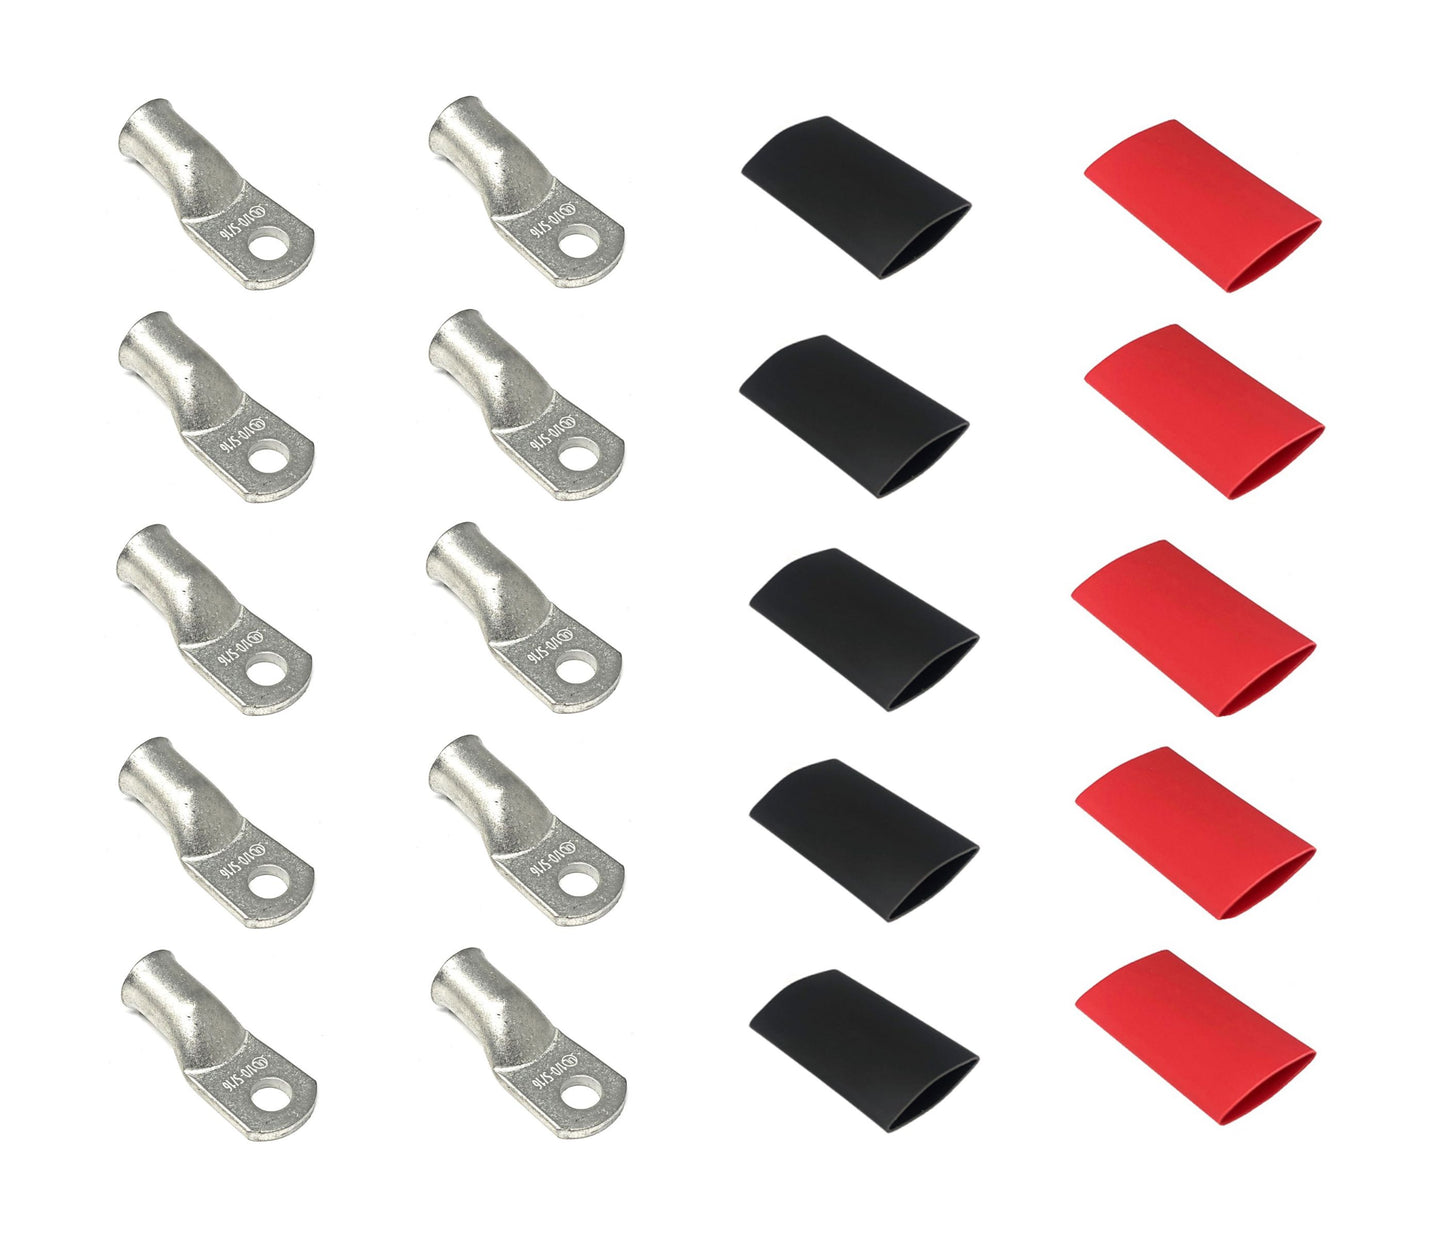 1/0 Gauge Cable Lugs with Heat Shrink Tubing Kit